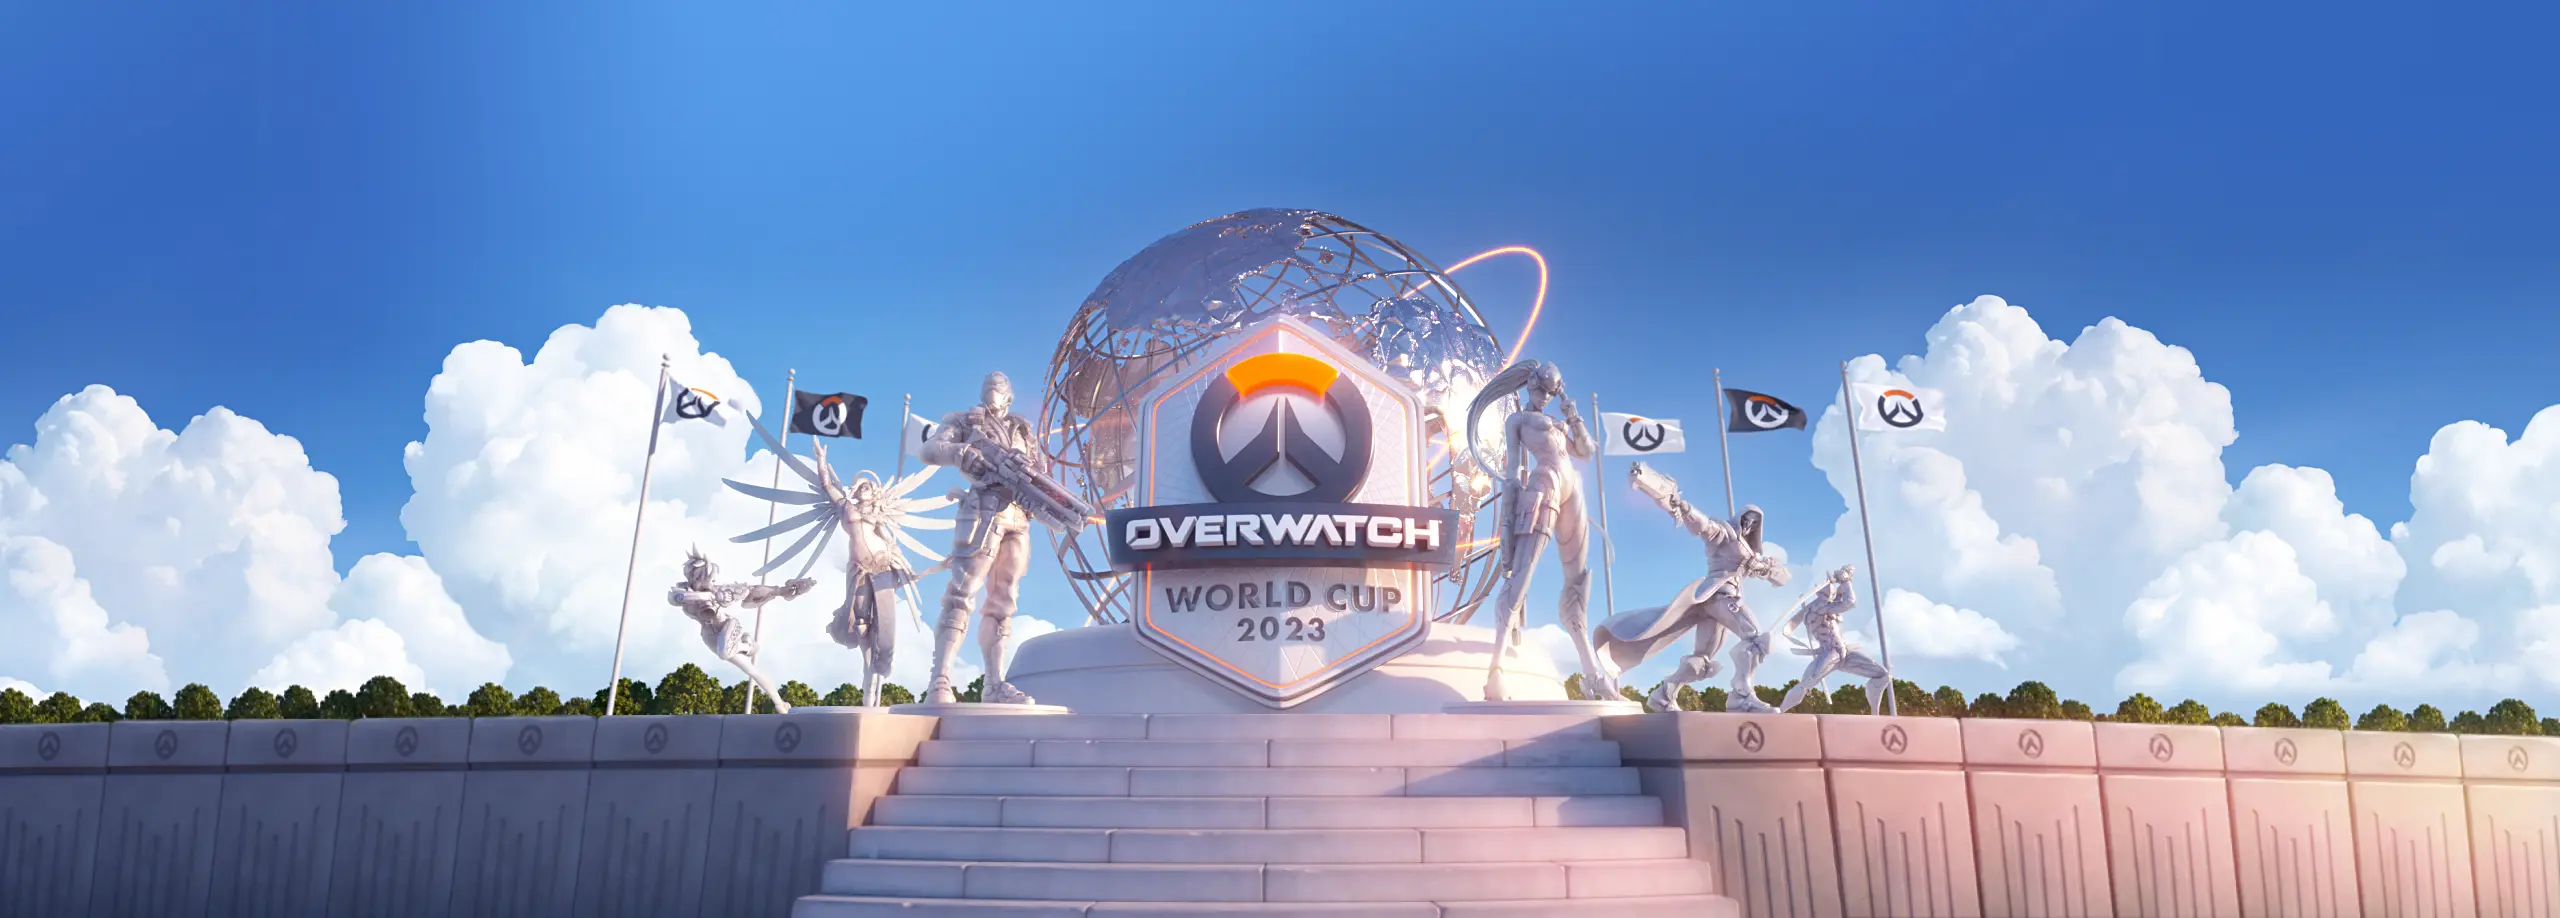 Why Did MASAA Drop Out of the Esports World Cup Overwatch Event?